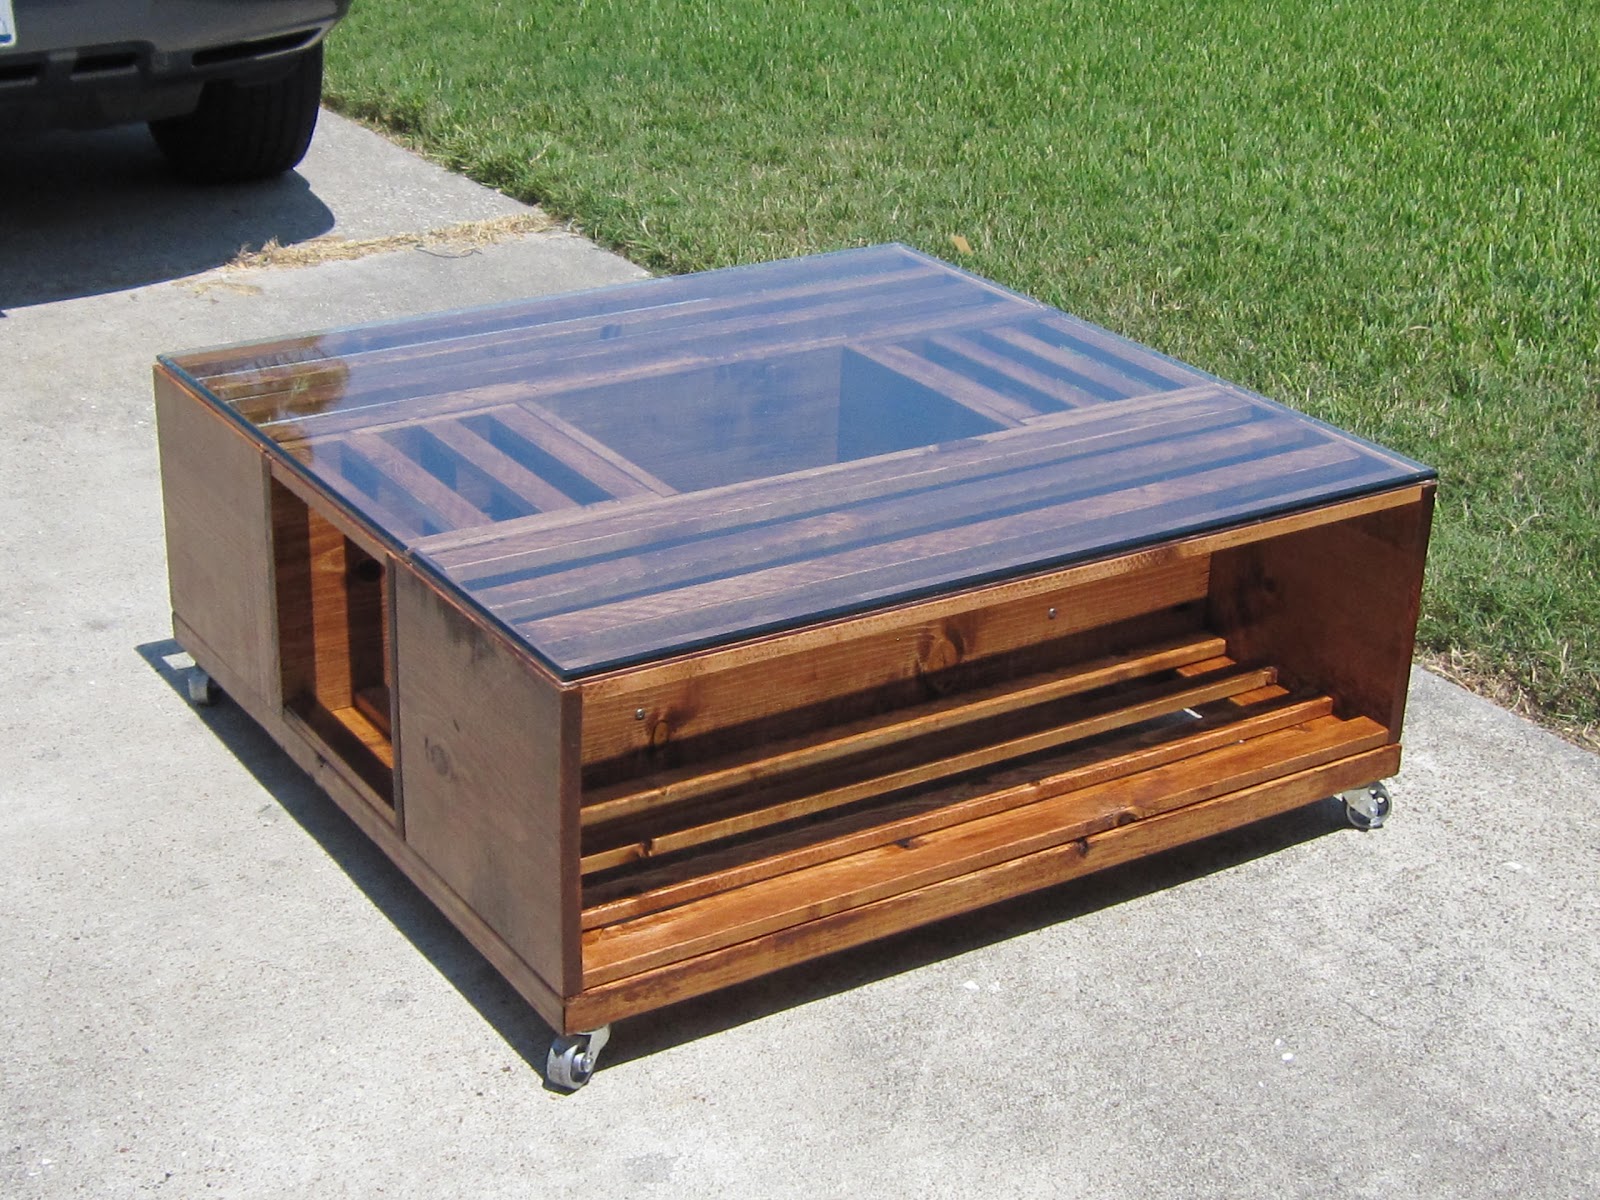 Crate Coffee Table With a Glass Top